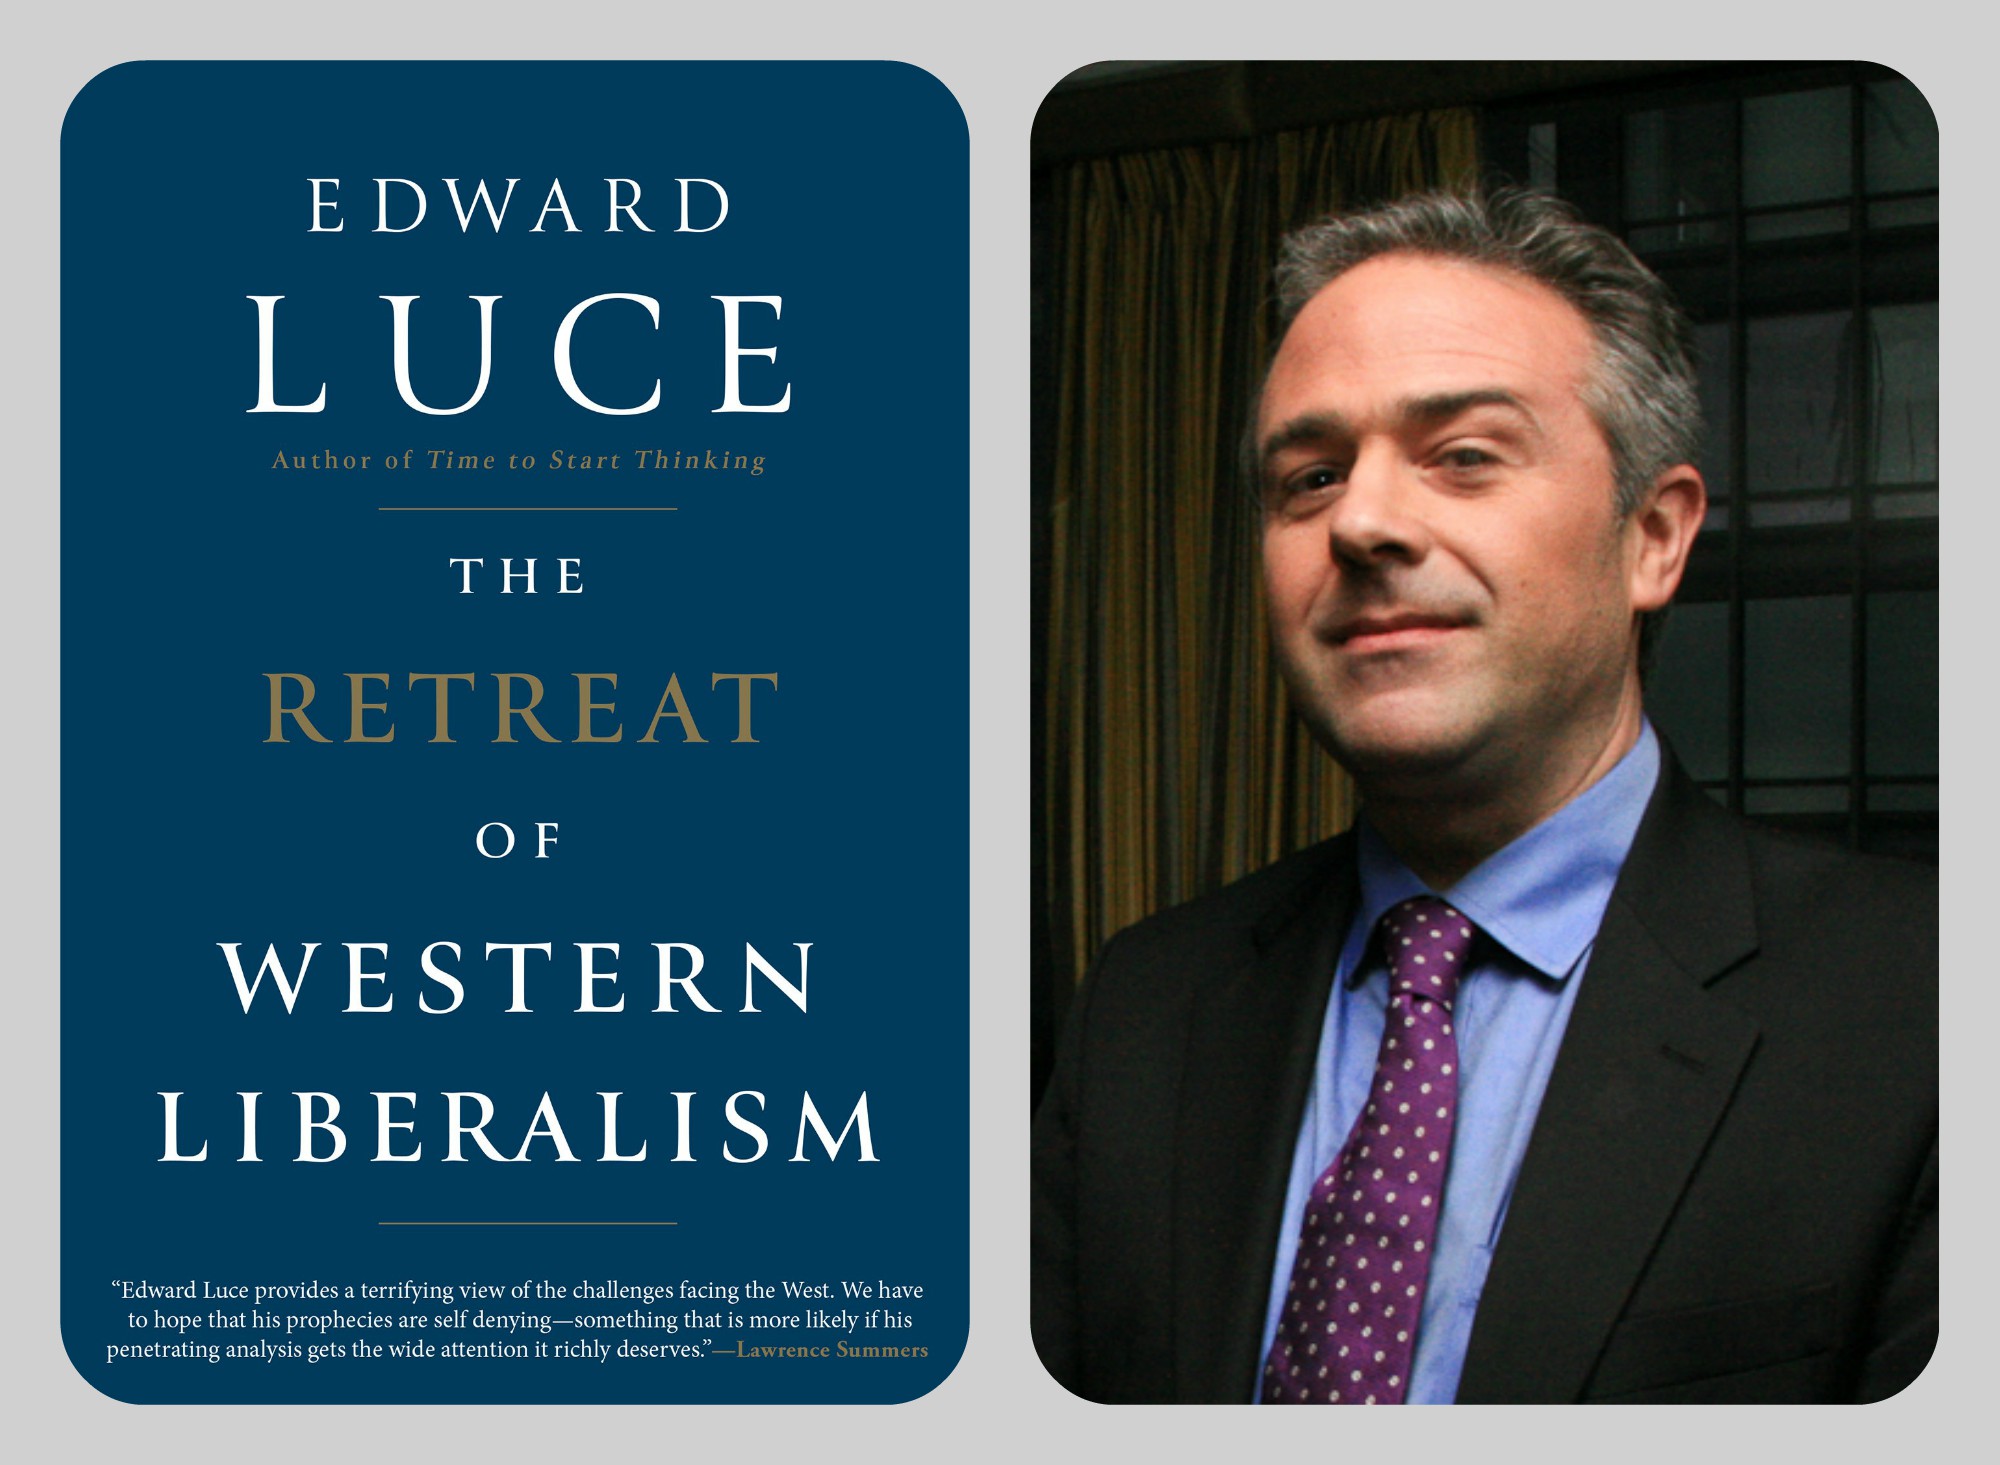 Luce Western Liberalism iPiccy-collage